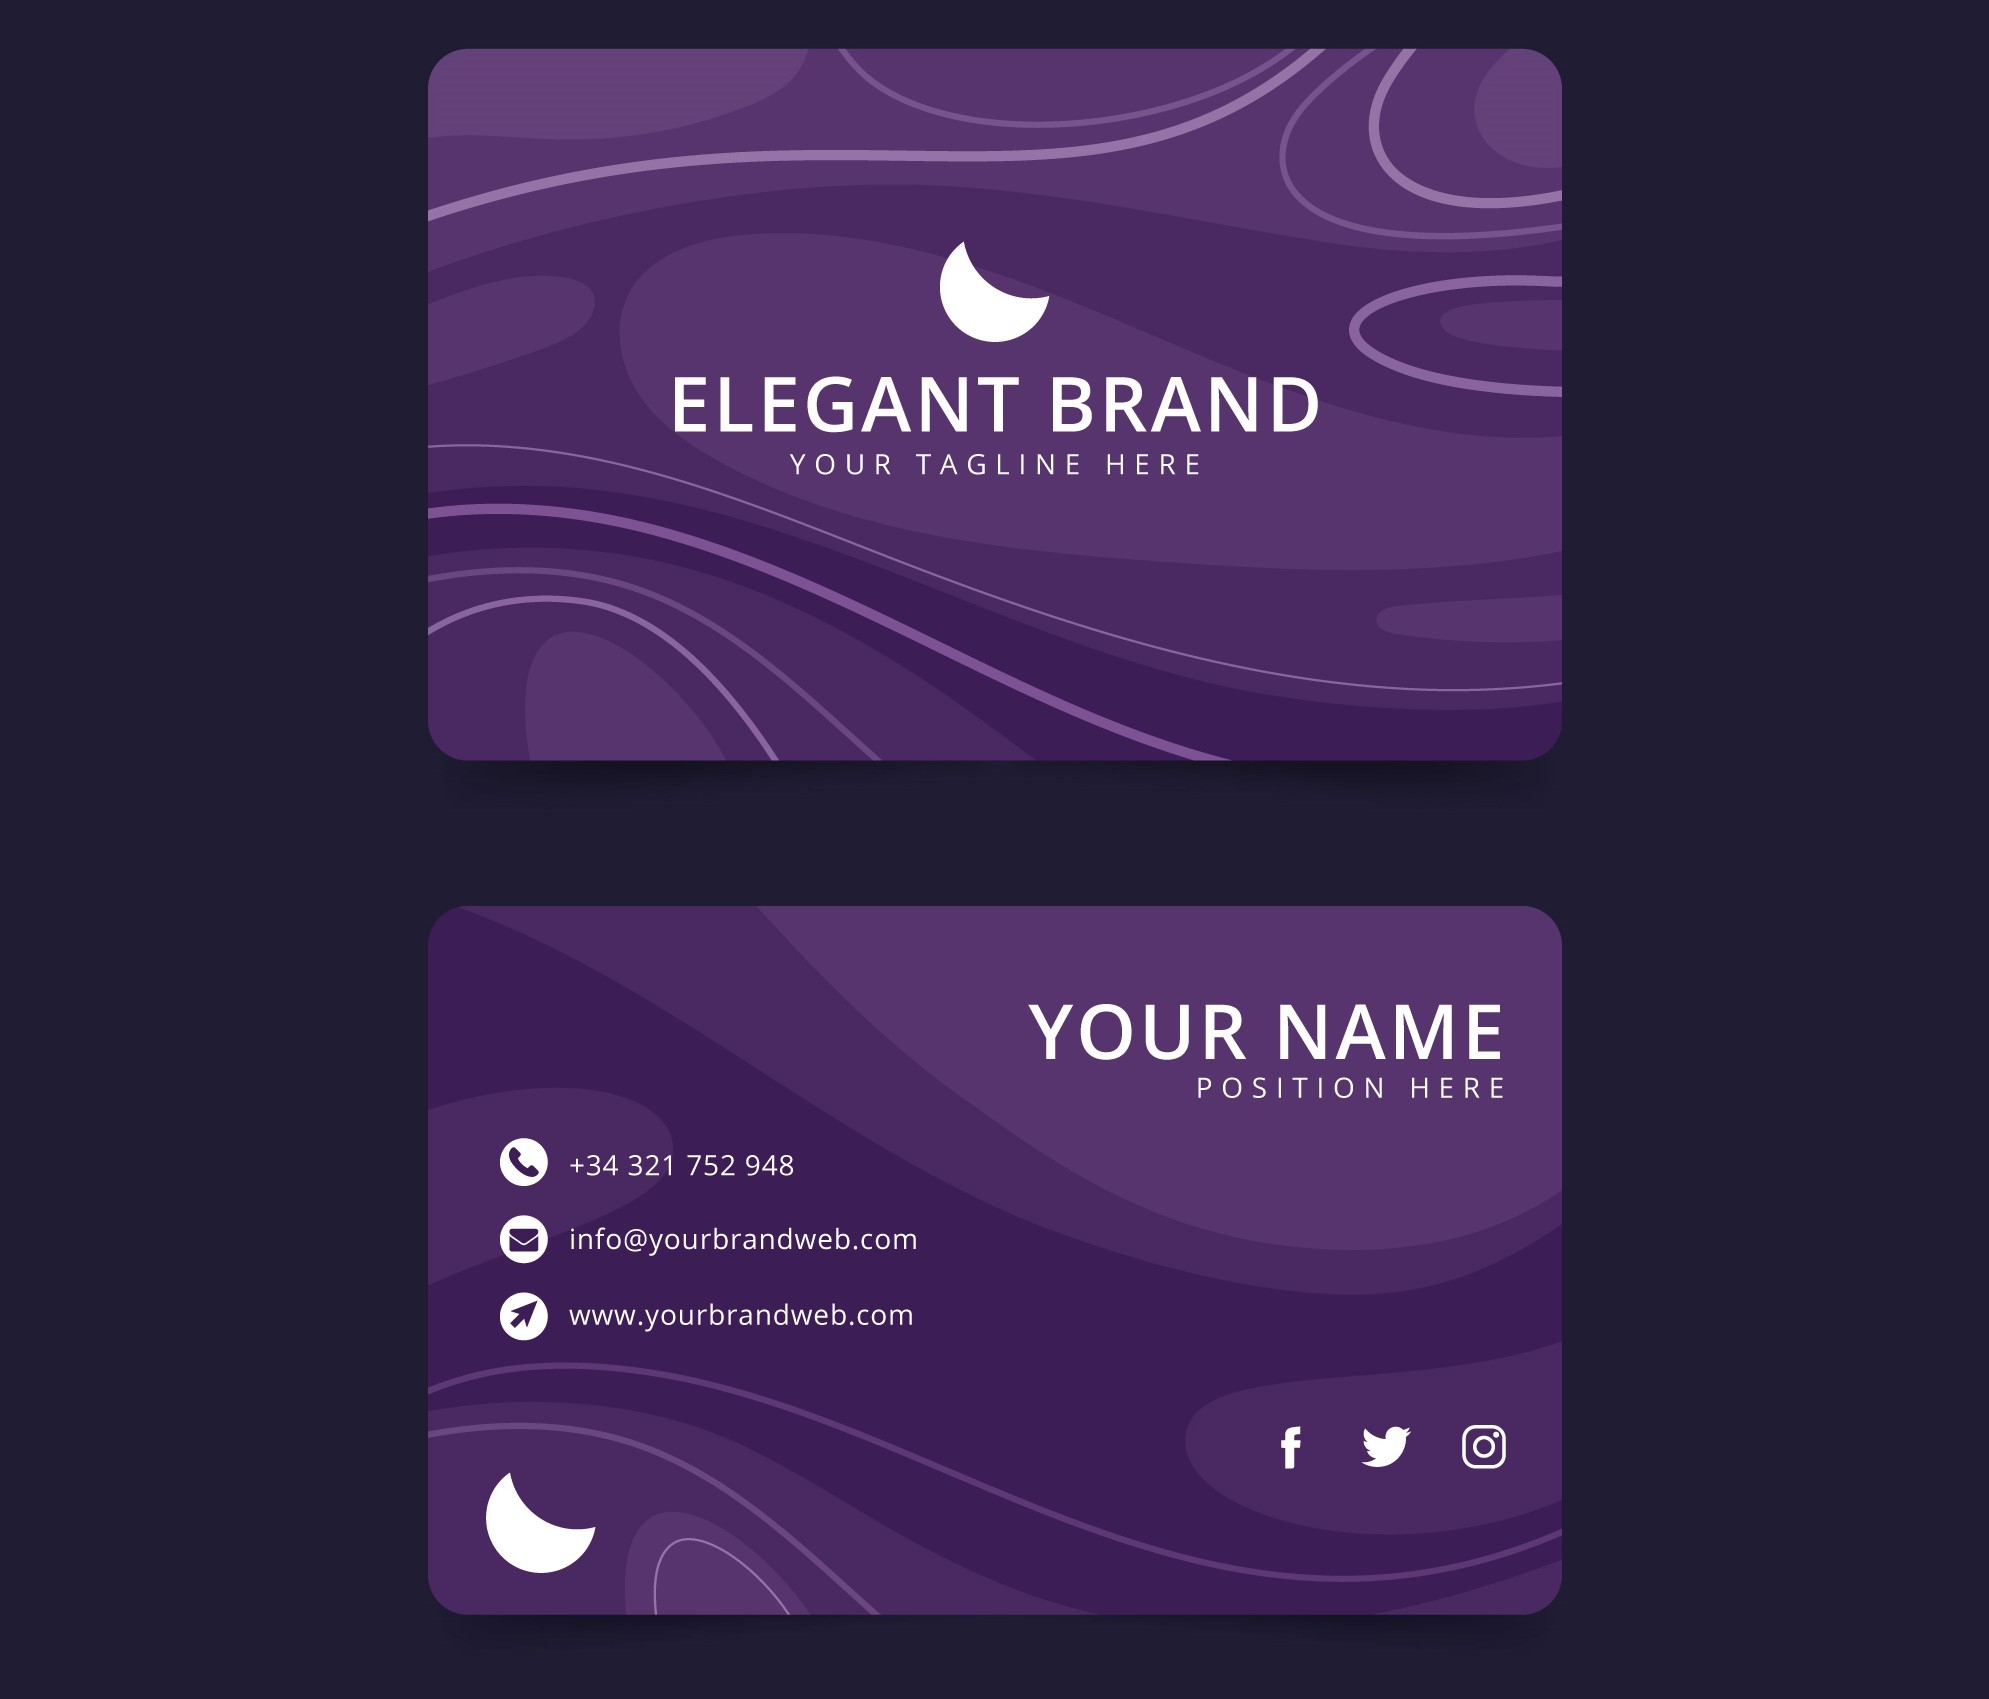 social media icons business cards 1